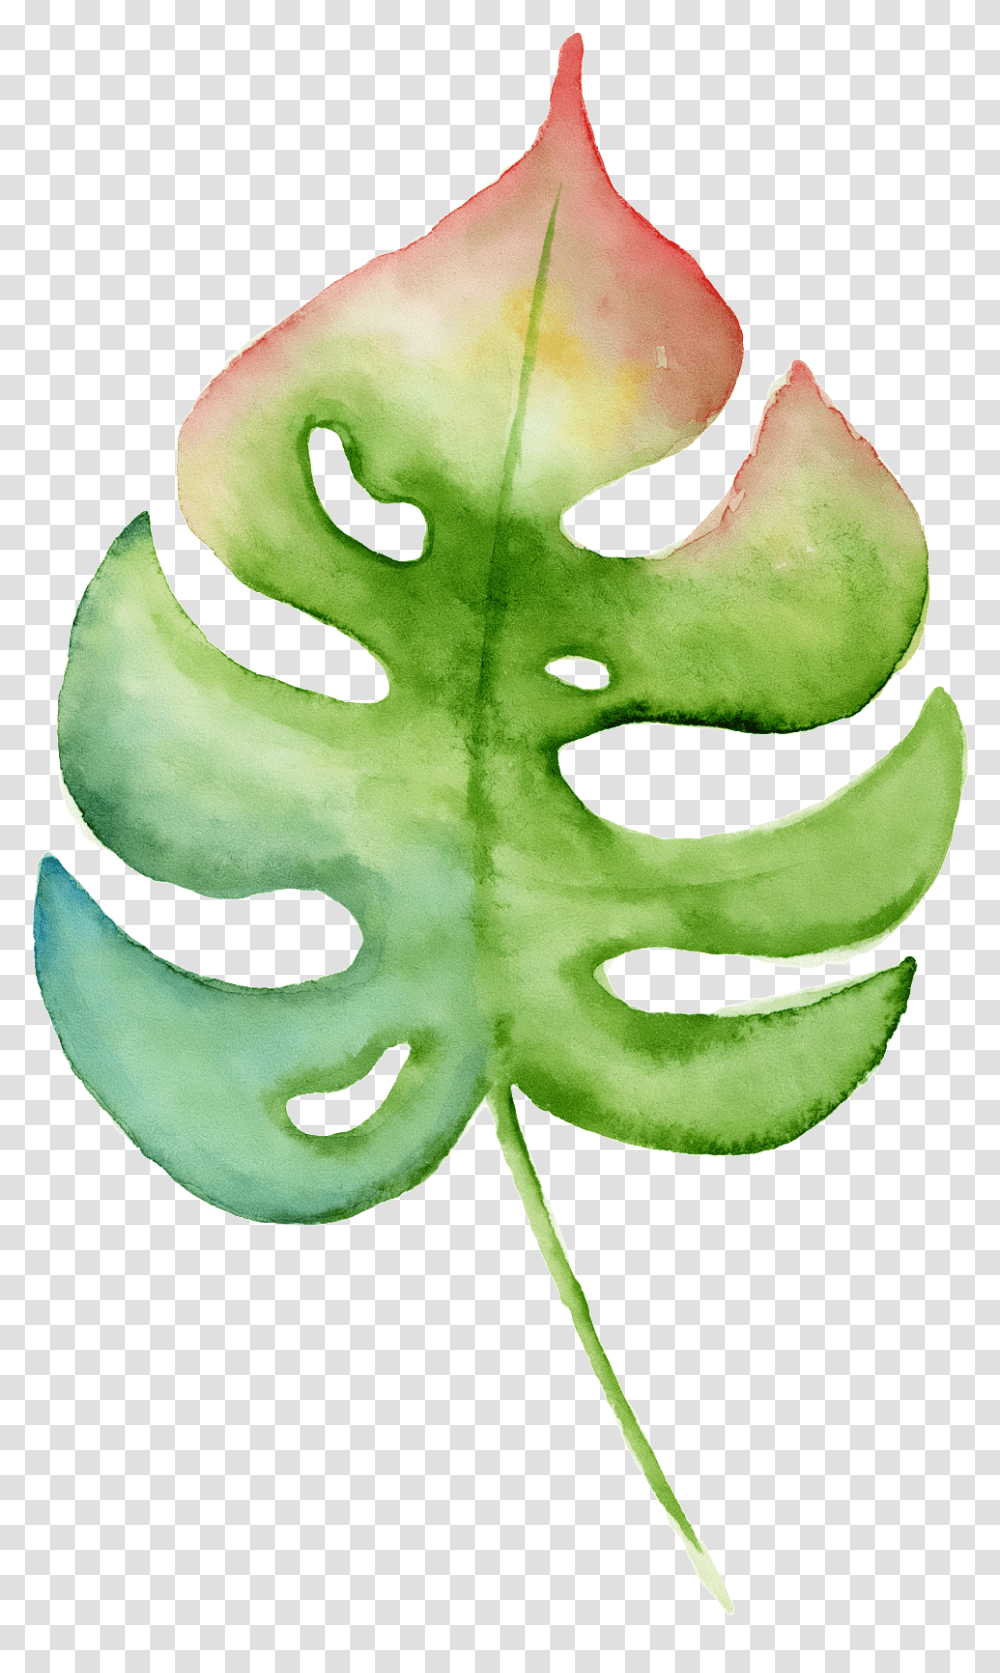 Download Hd Hand Painted A Leaf Watercolor Swiss Cheese Plant, Vegetable, Food, Produce, Tree Transparent Png